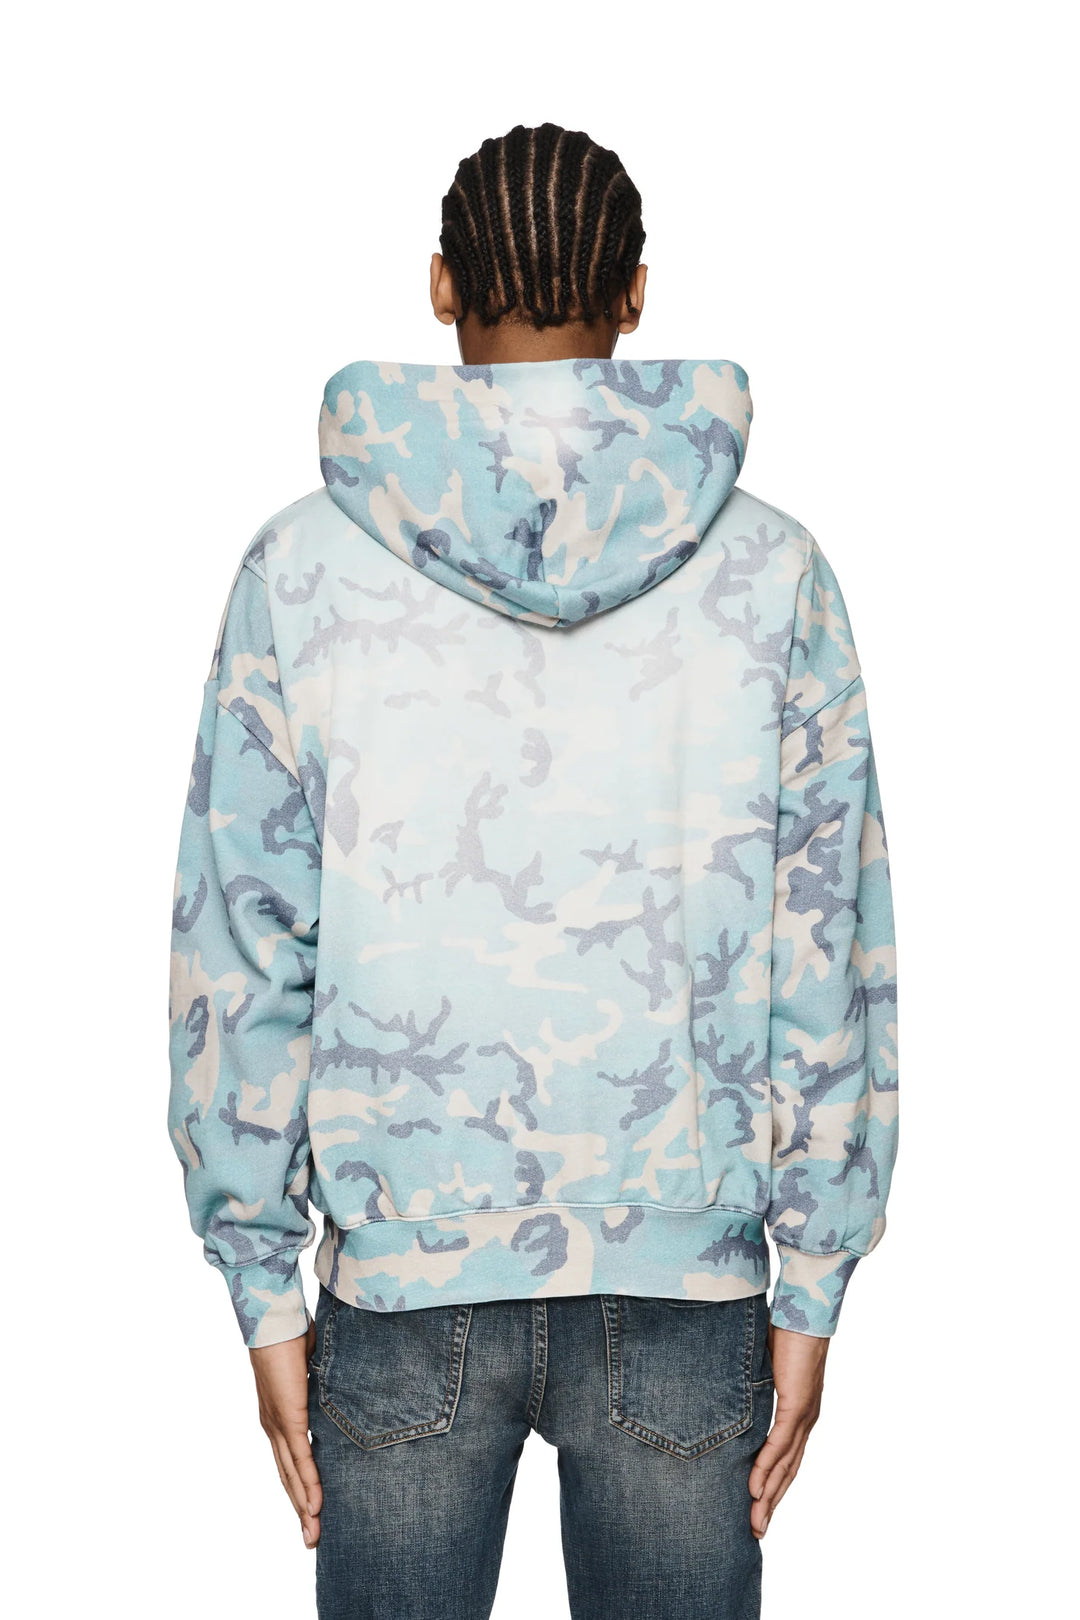 Purple Brand P401 AOP MFCA224 Faded Camo Hoodie - All Over Print